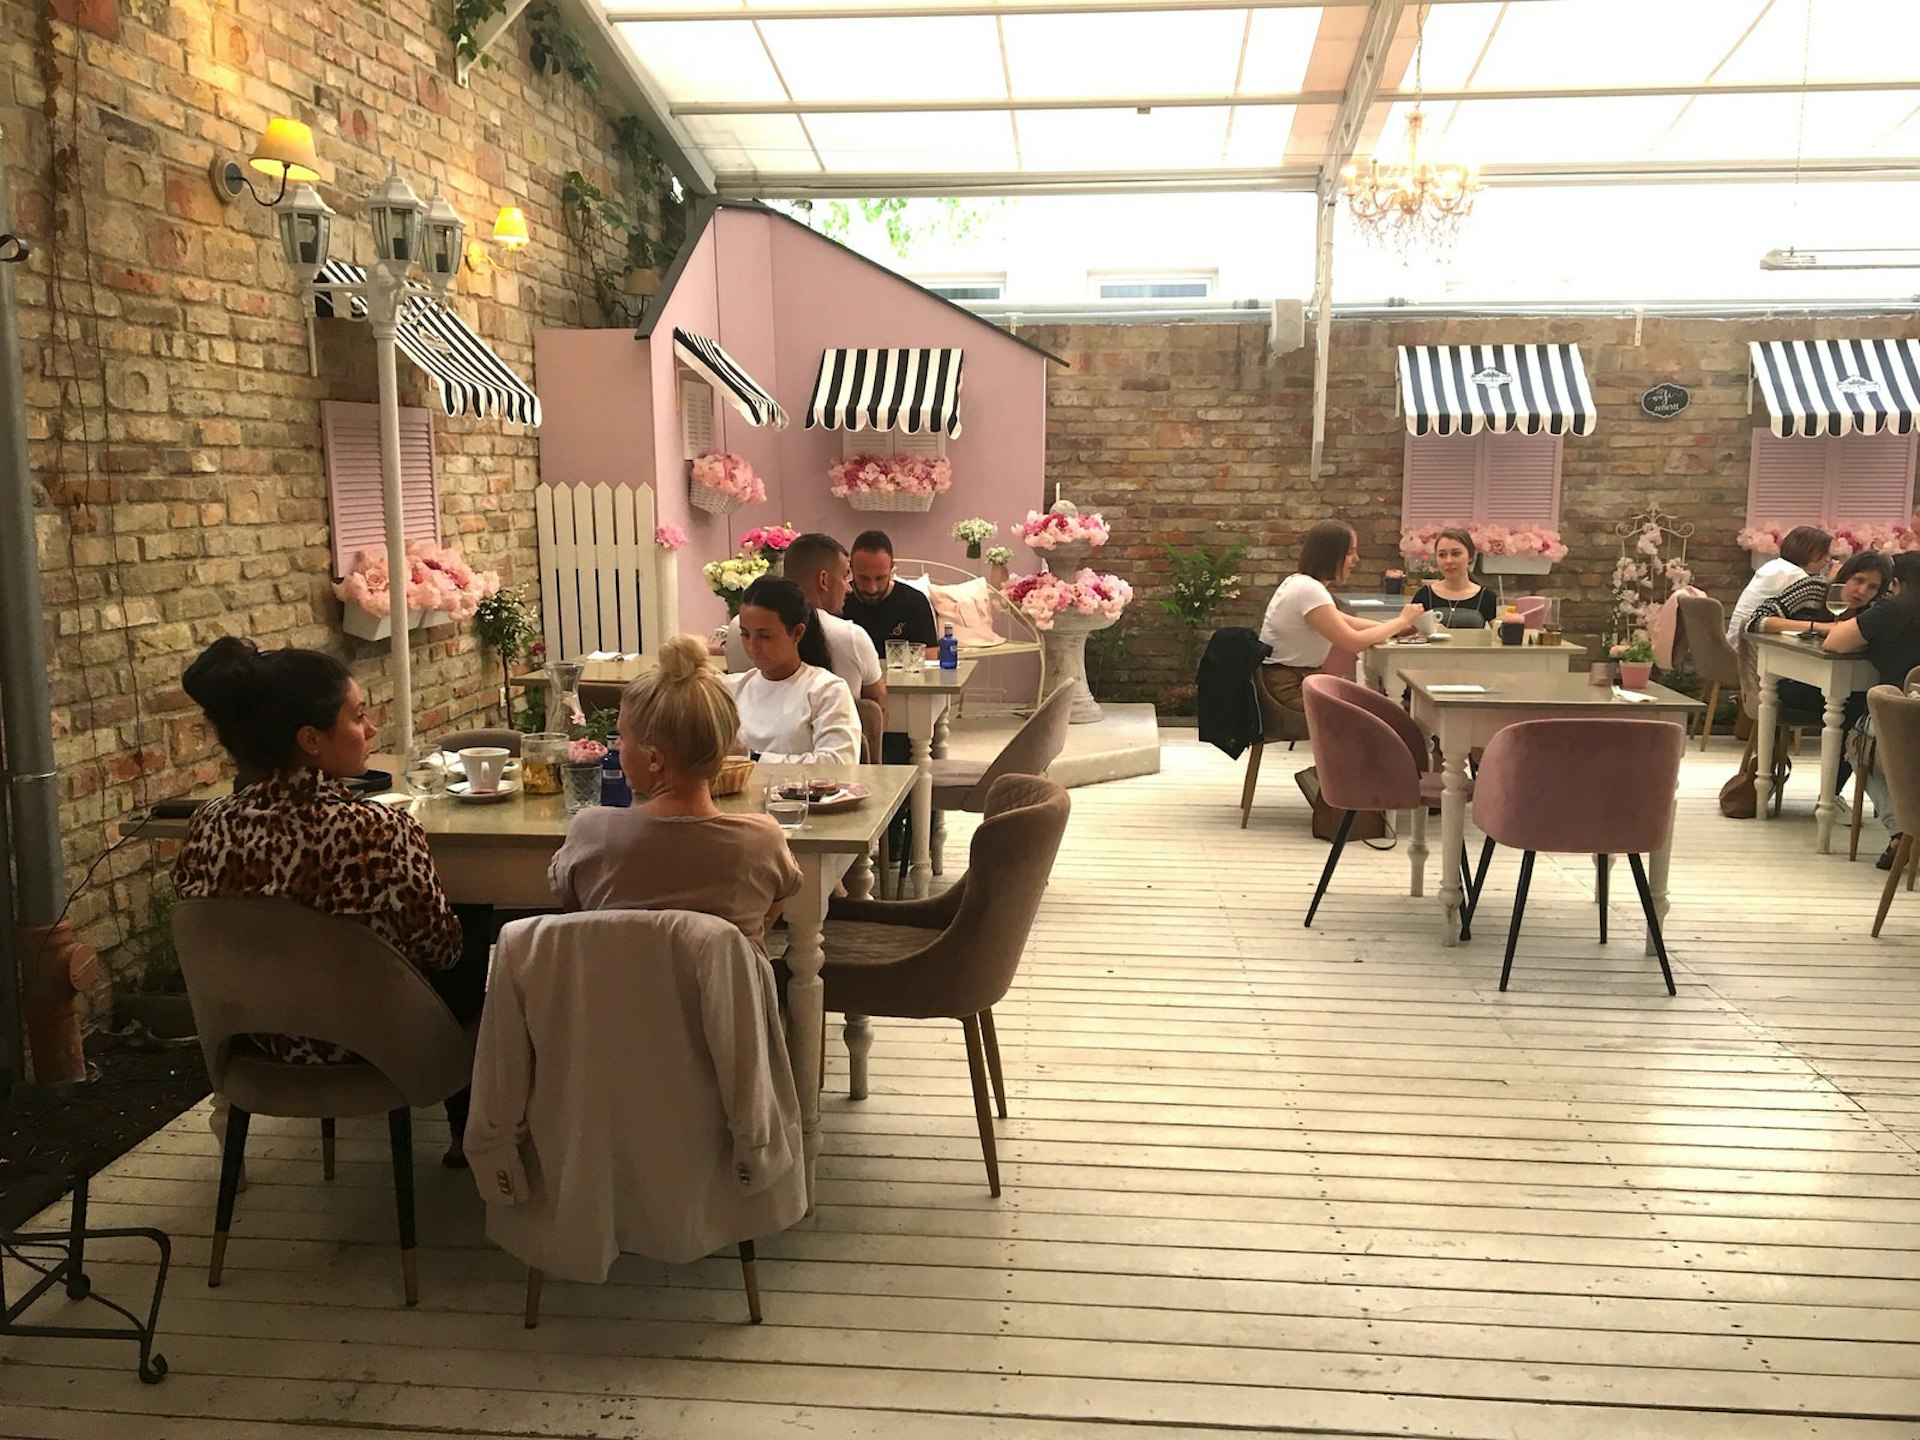 A series of wooden tables with pink chairs, most full of patrons, sits on white floorboards; there are brick walls with closed pink shutters, while light cascades in from a transparent ceiling